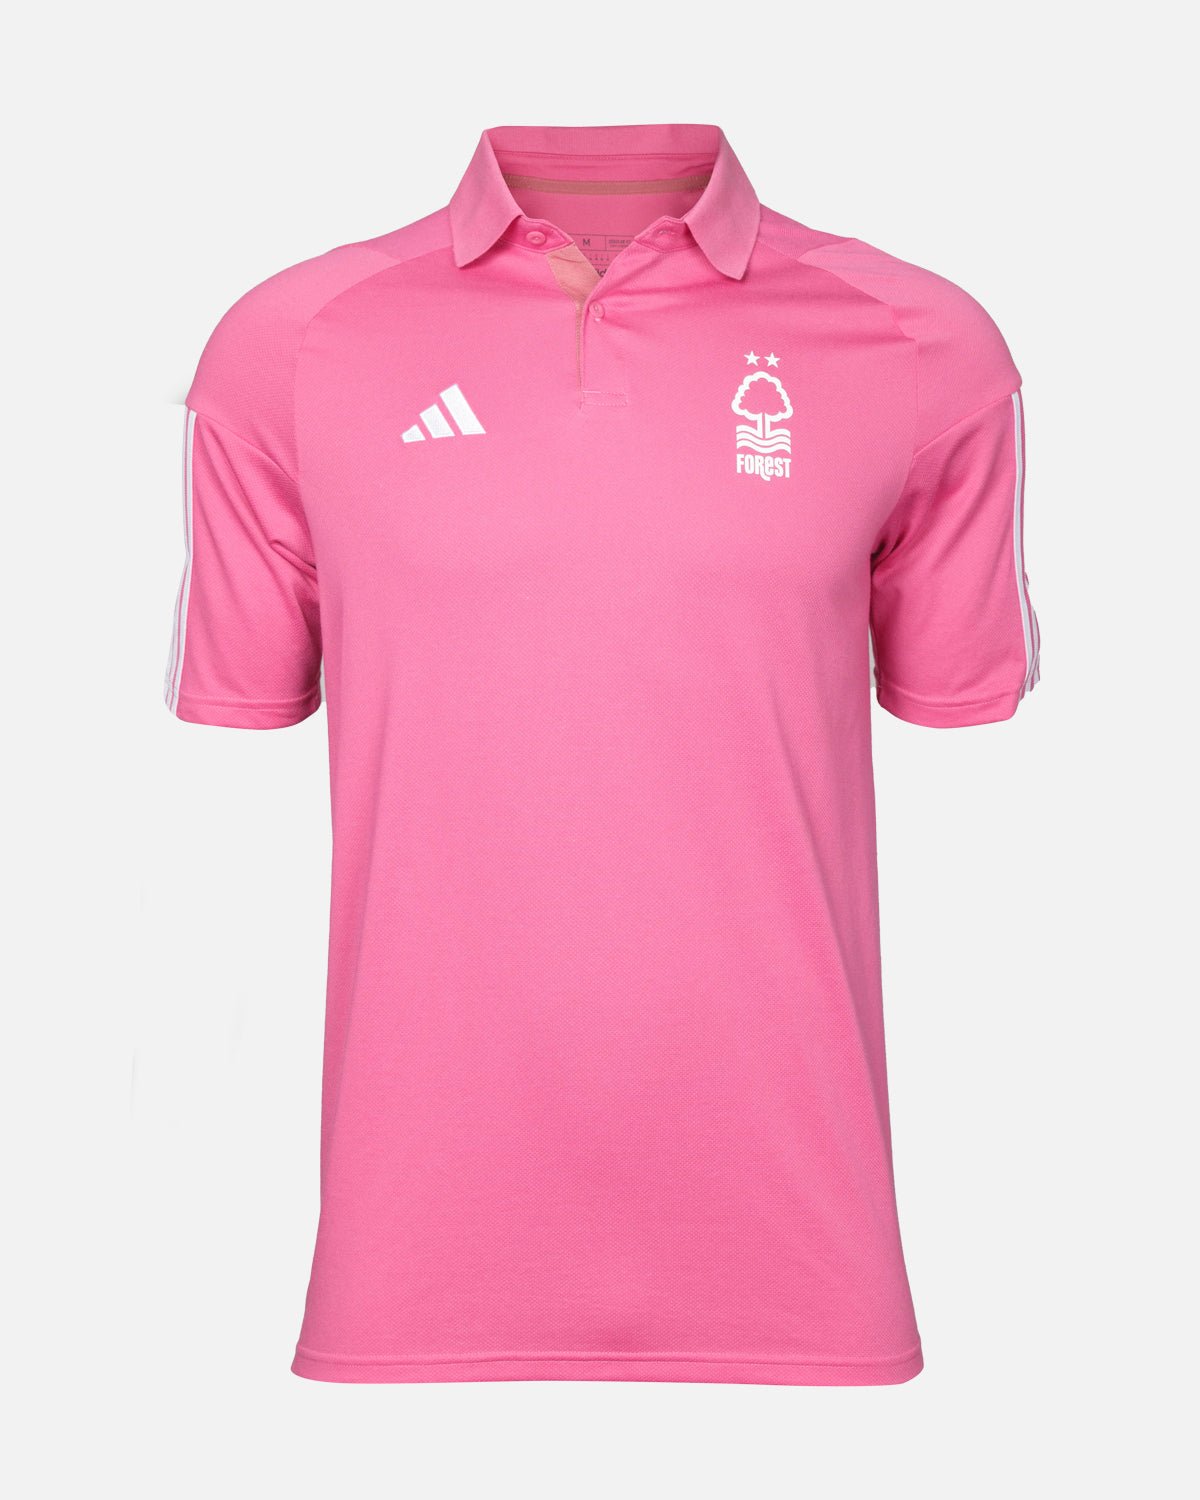 NFFC Pink Warm Up Polo 23-24 - Nottingham Forest FC